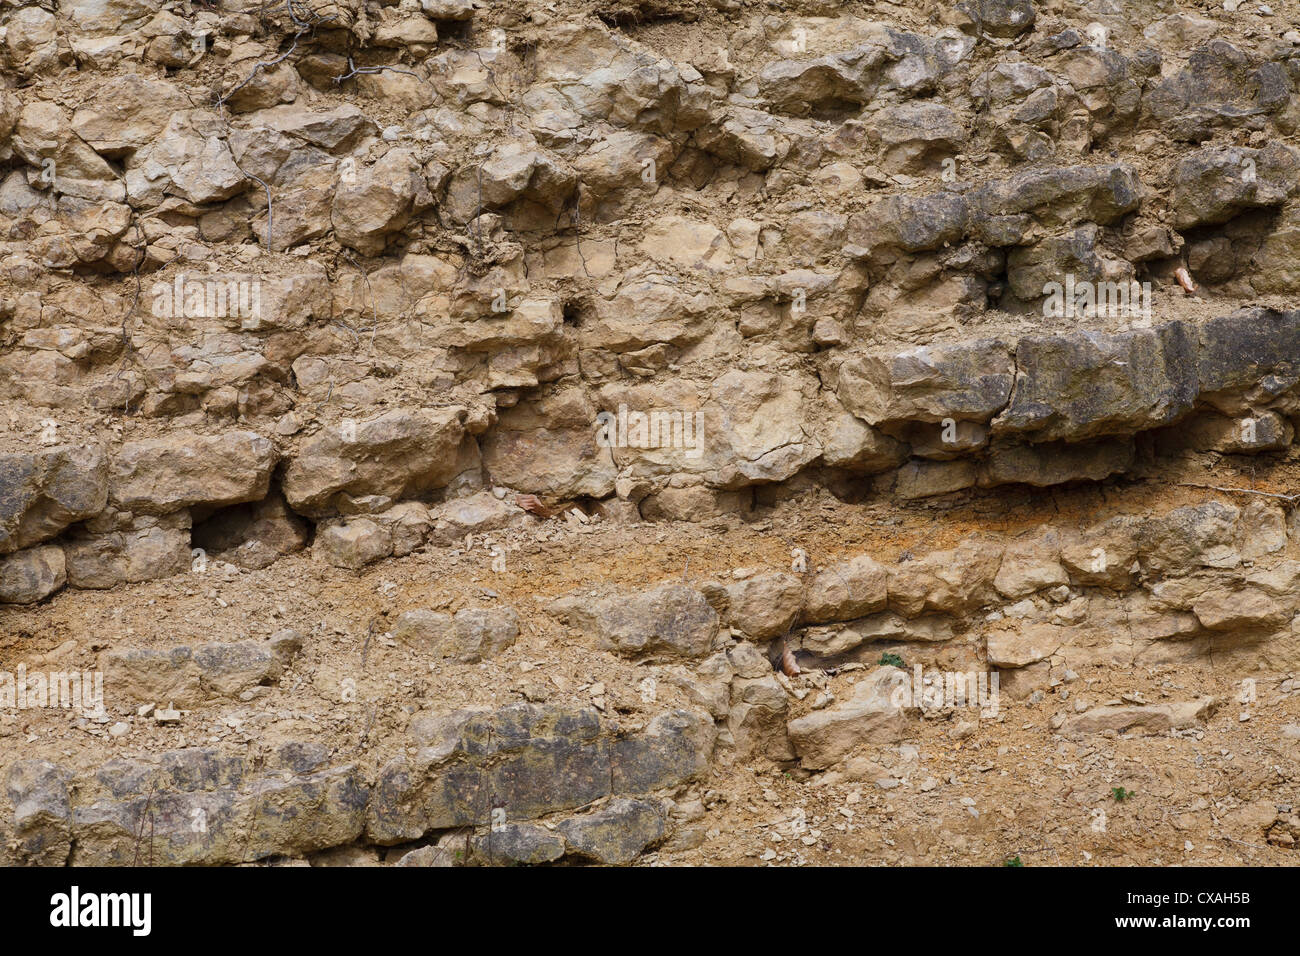 Silurian limestone in a quarry on Wenlock Edge, showing bedding. Shropshire, England. Stock Photo